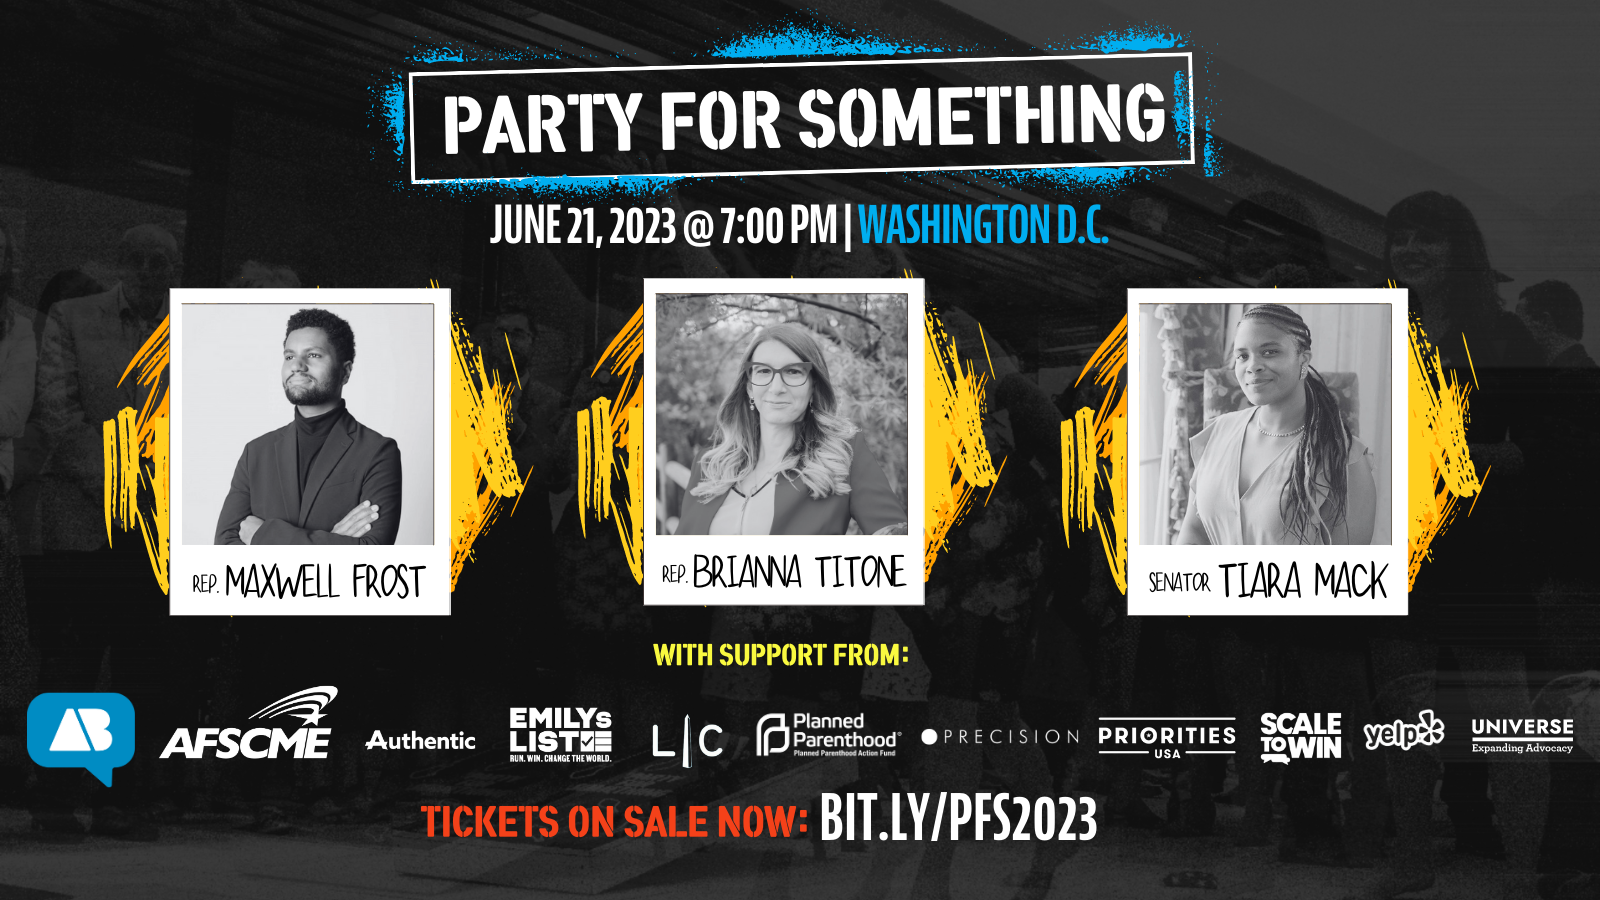 Party for Something June 21, 2023 @ 7:00 PM | Washington D.C. with Rep. Maxwell Frost, Rep. Brianna Titone, and Senator Tiara Mack. Tickets on sale now